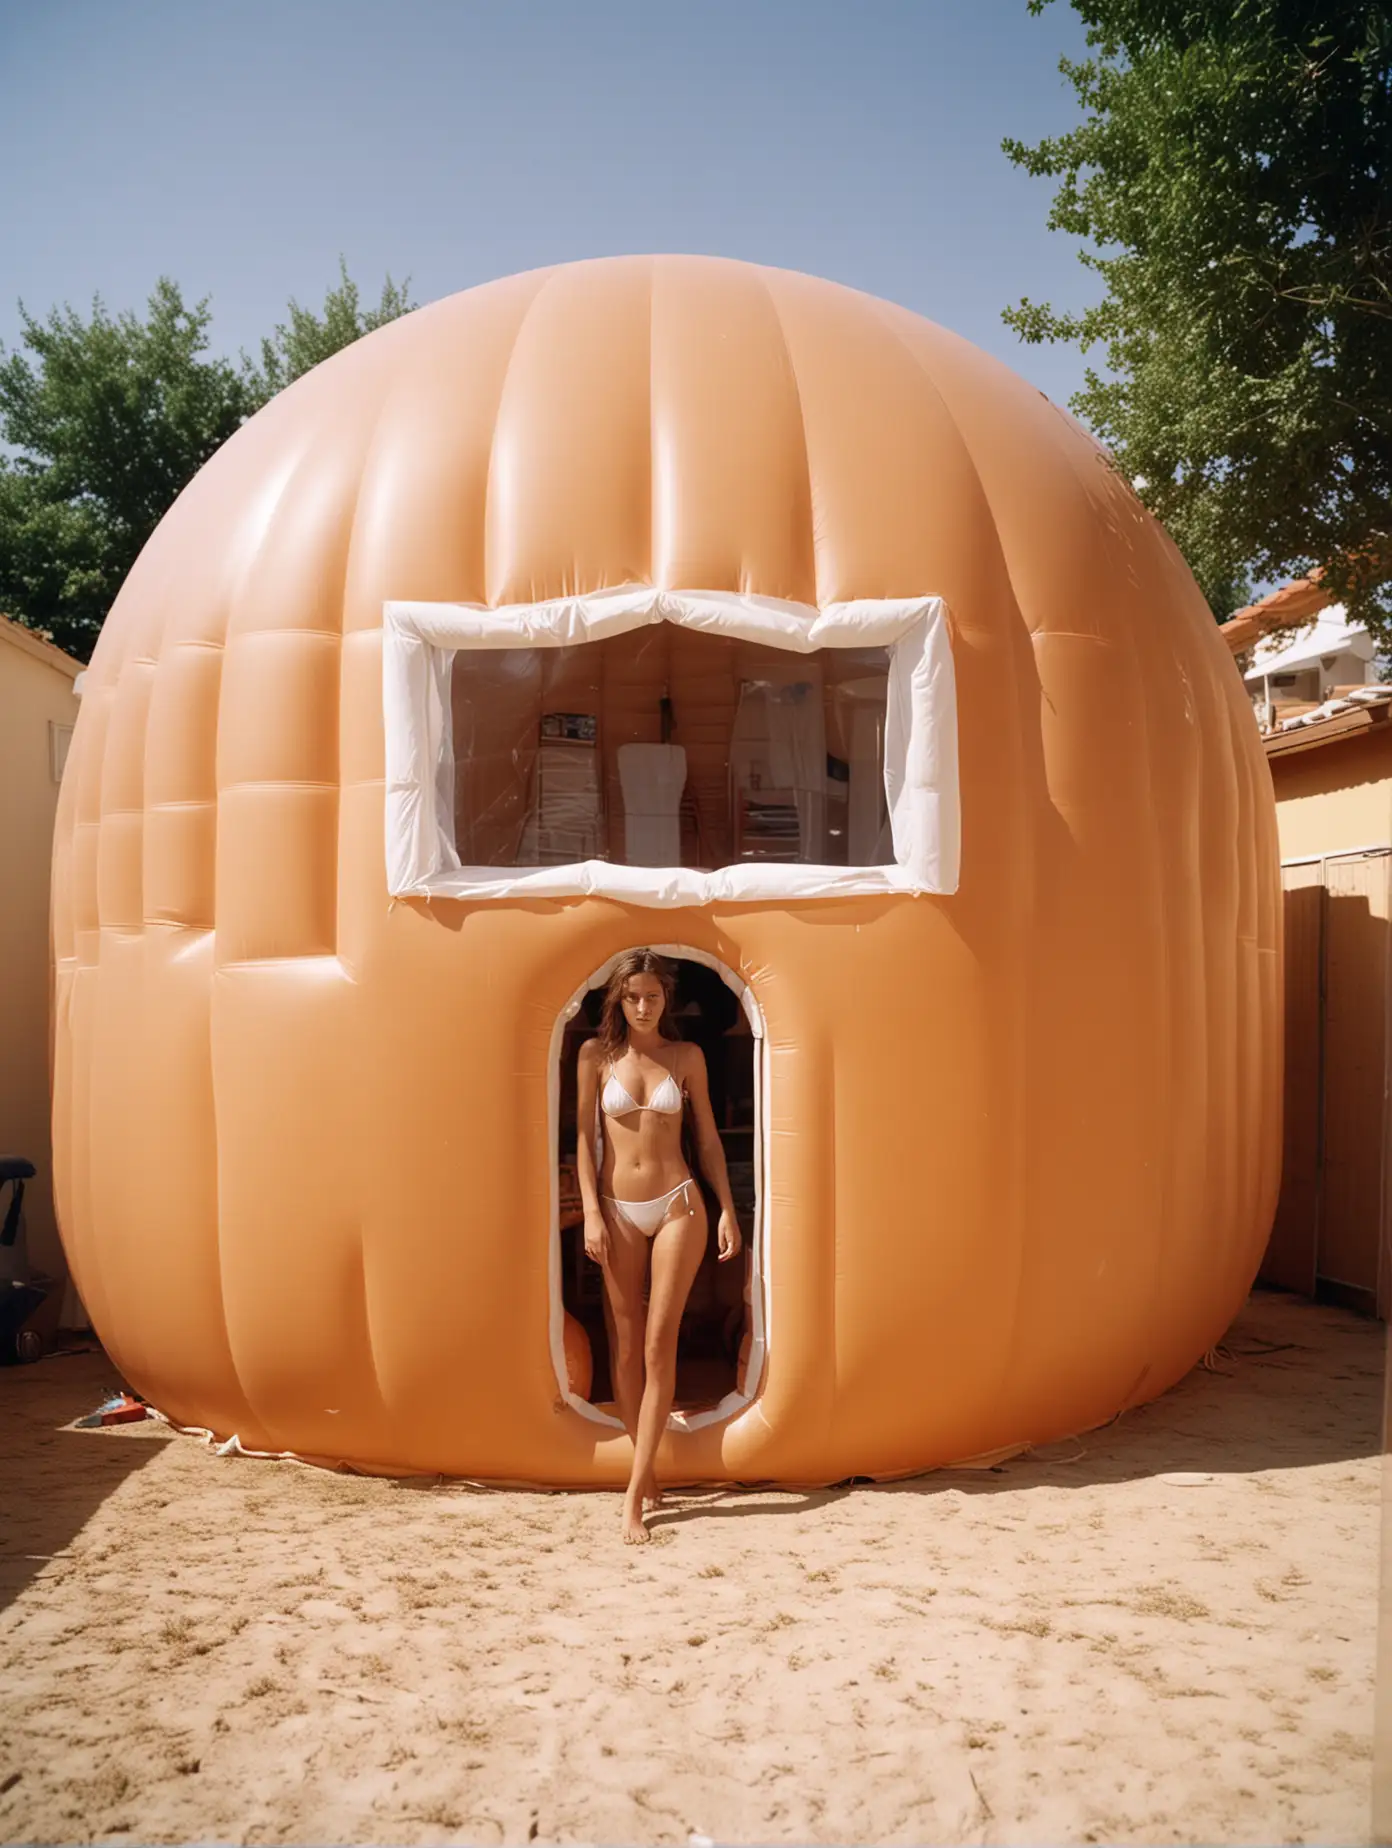 Tanned Model Poses in Inflatable House Vibrant Portrait Photography